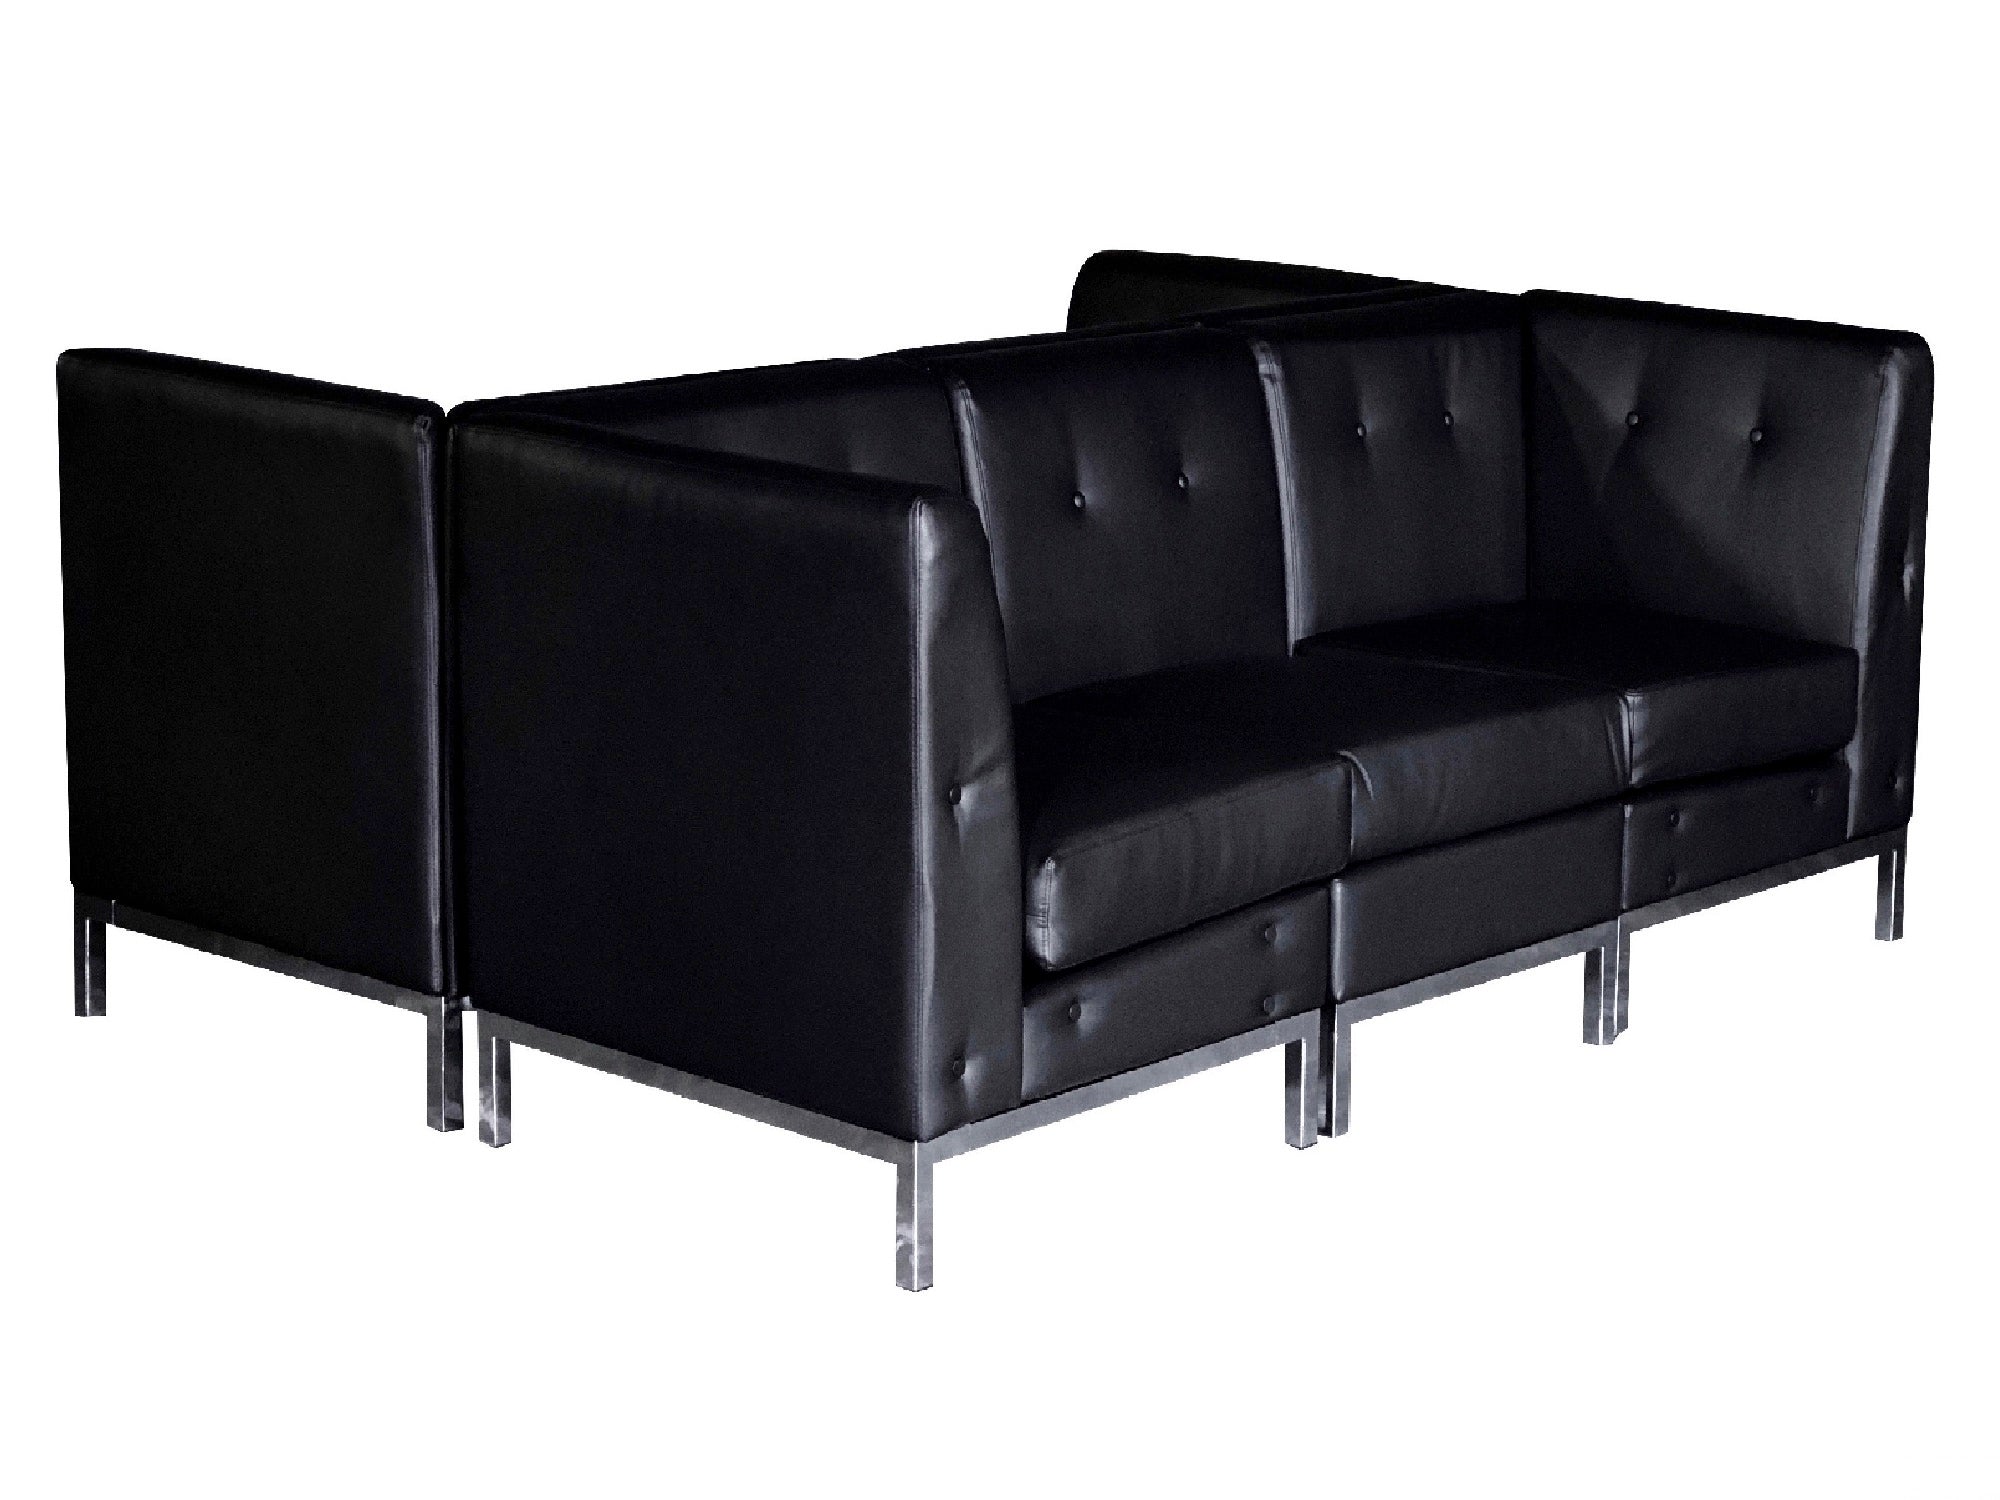 PEACHTREE 6PC "H" SHAPED SECTIONAL - BLACK